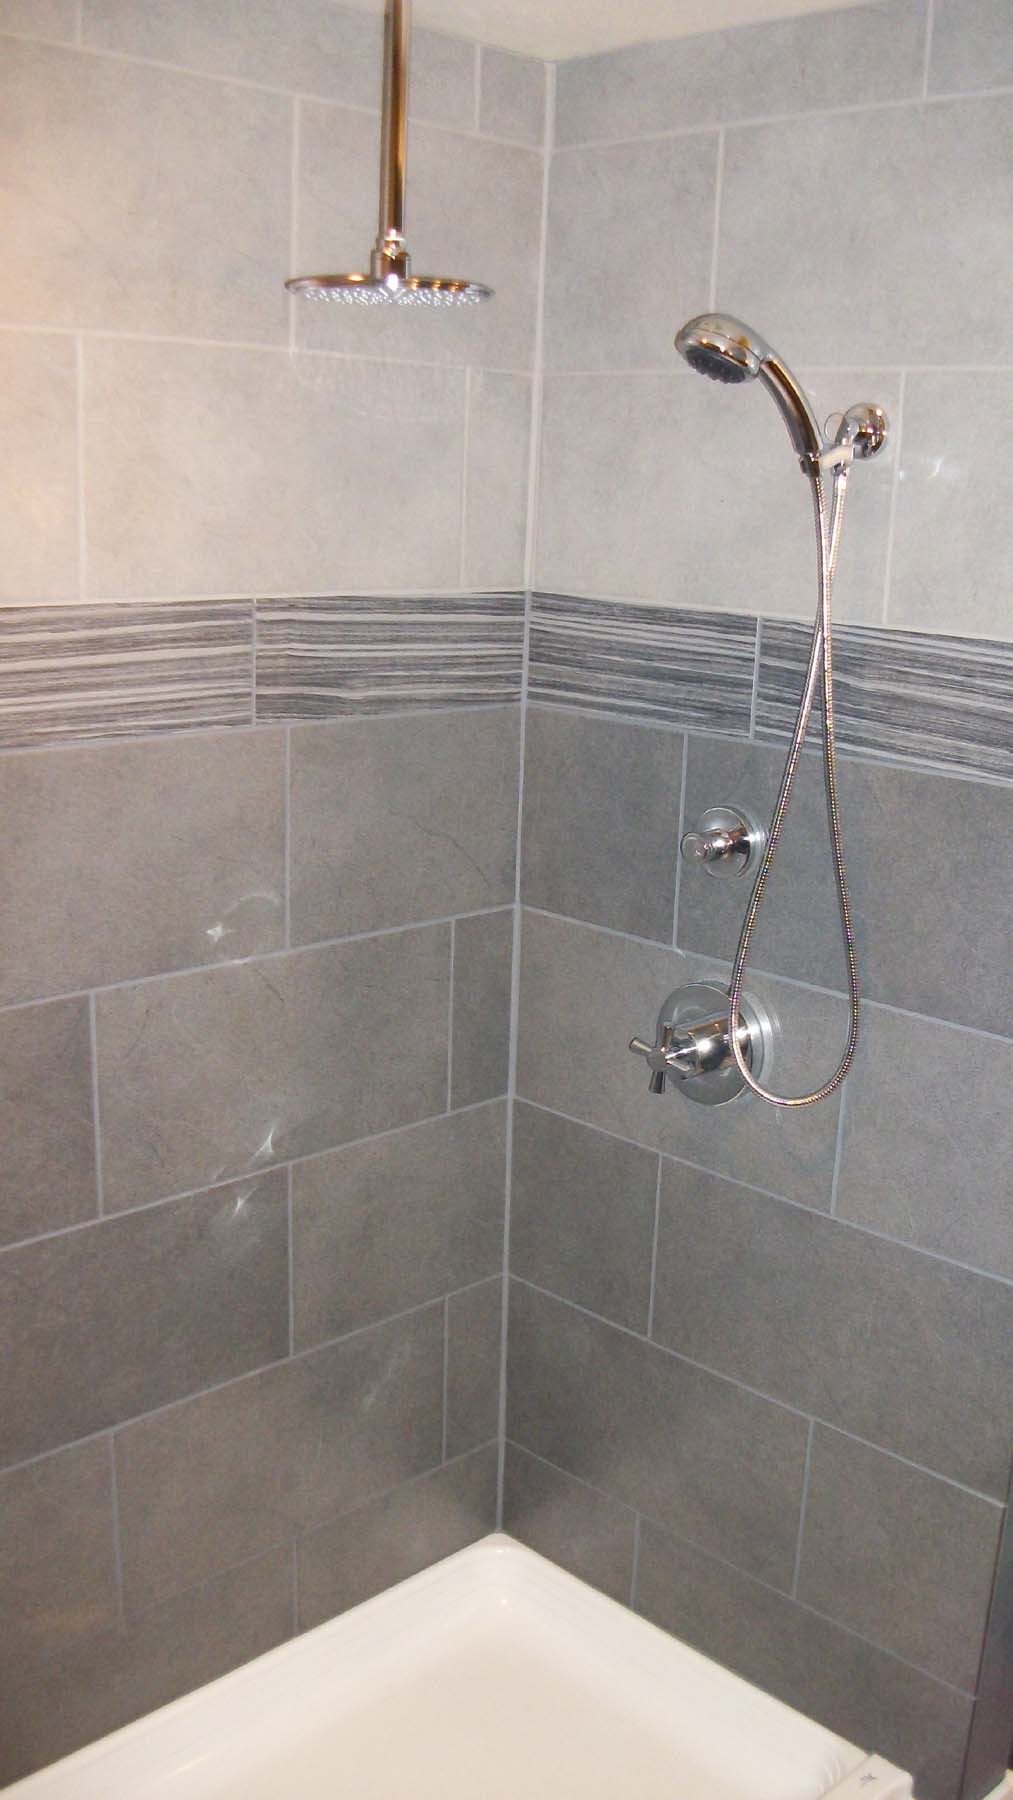 Shower 12X24 Tile Patterns For Small Bathrooms : 12 best images about